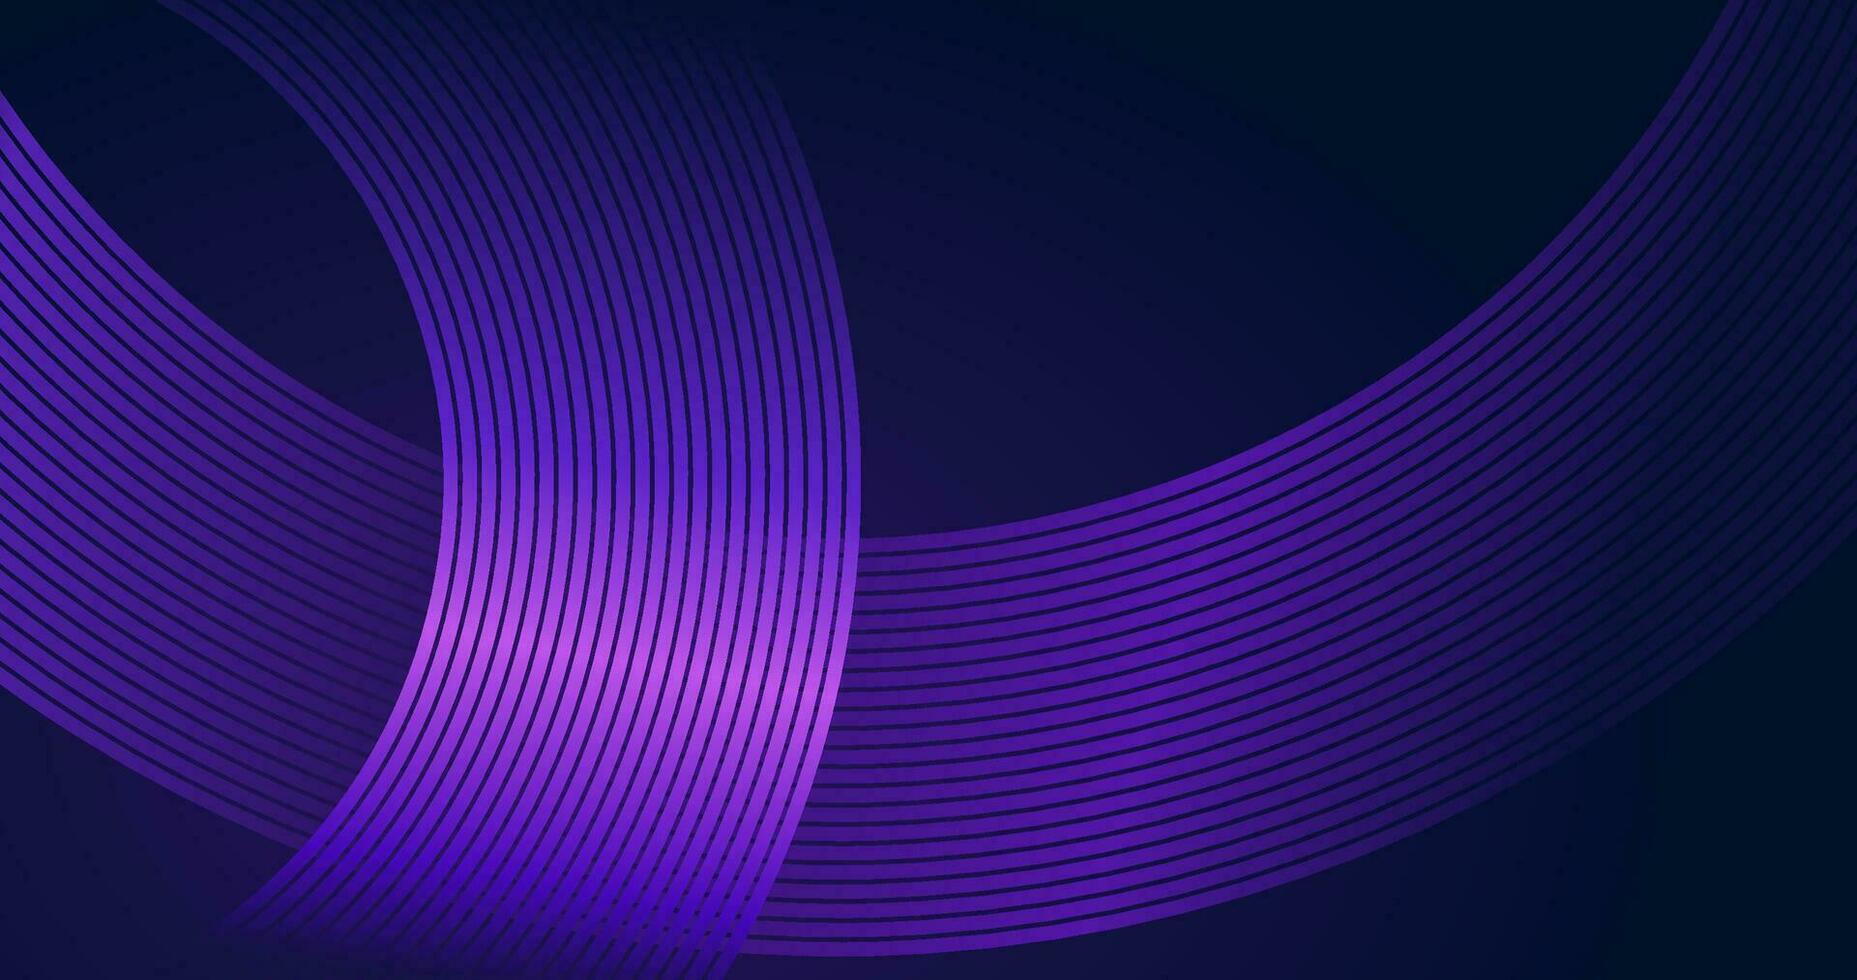 abstract background with glowing lines vector